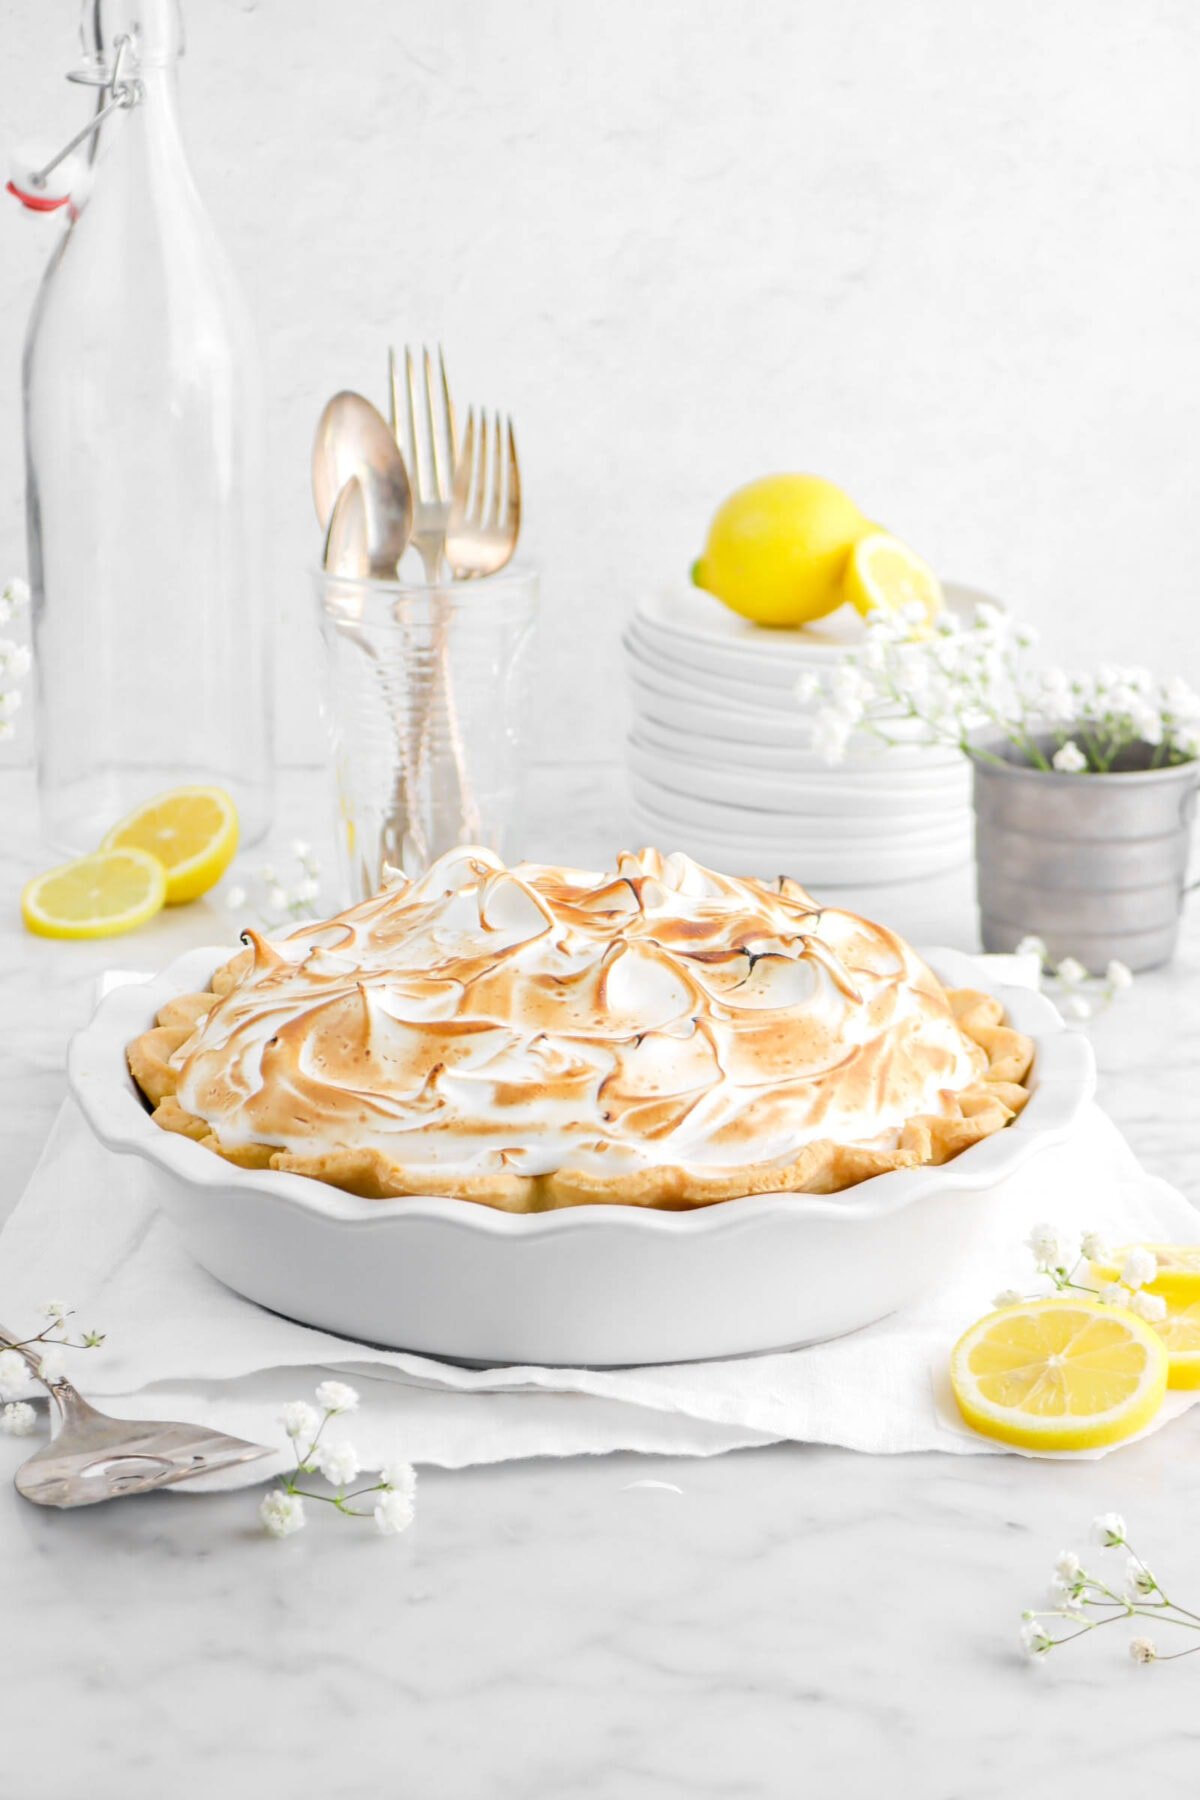 front shot of lemon meringue pie on white napkin with lemon slices, flowers, stack of plates, and utensils standing up in a glass